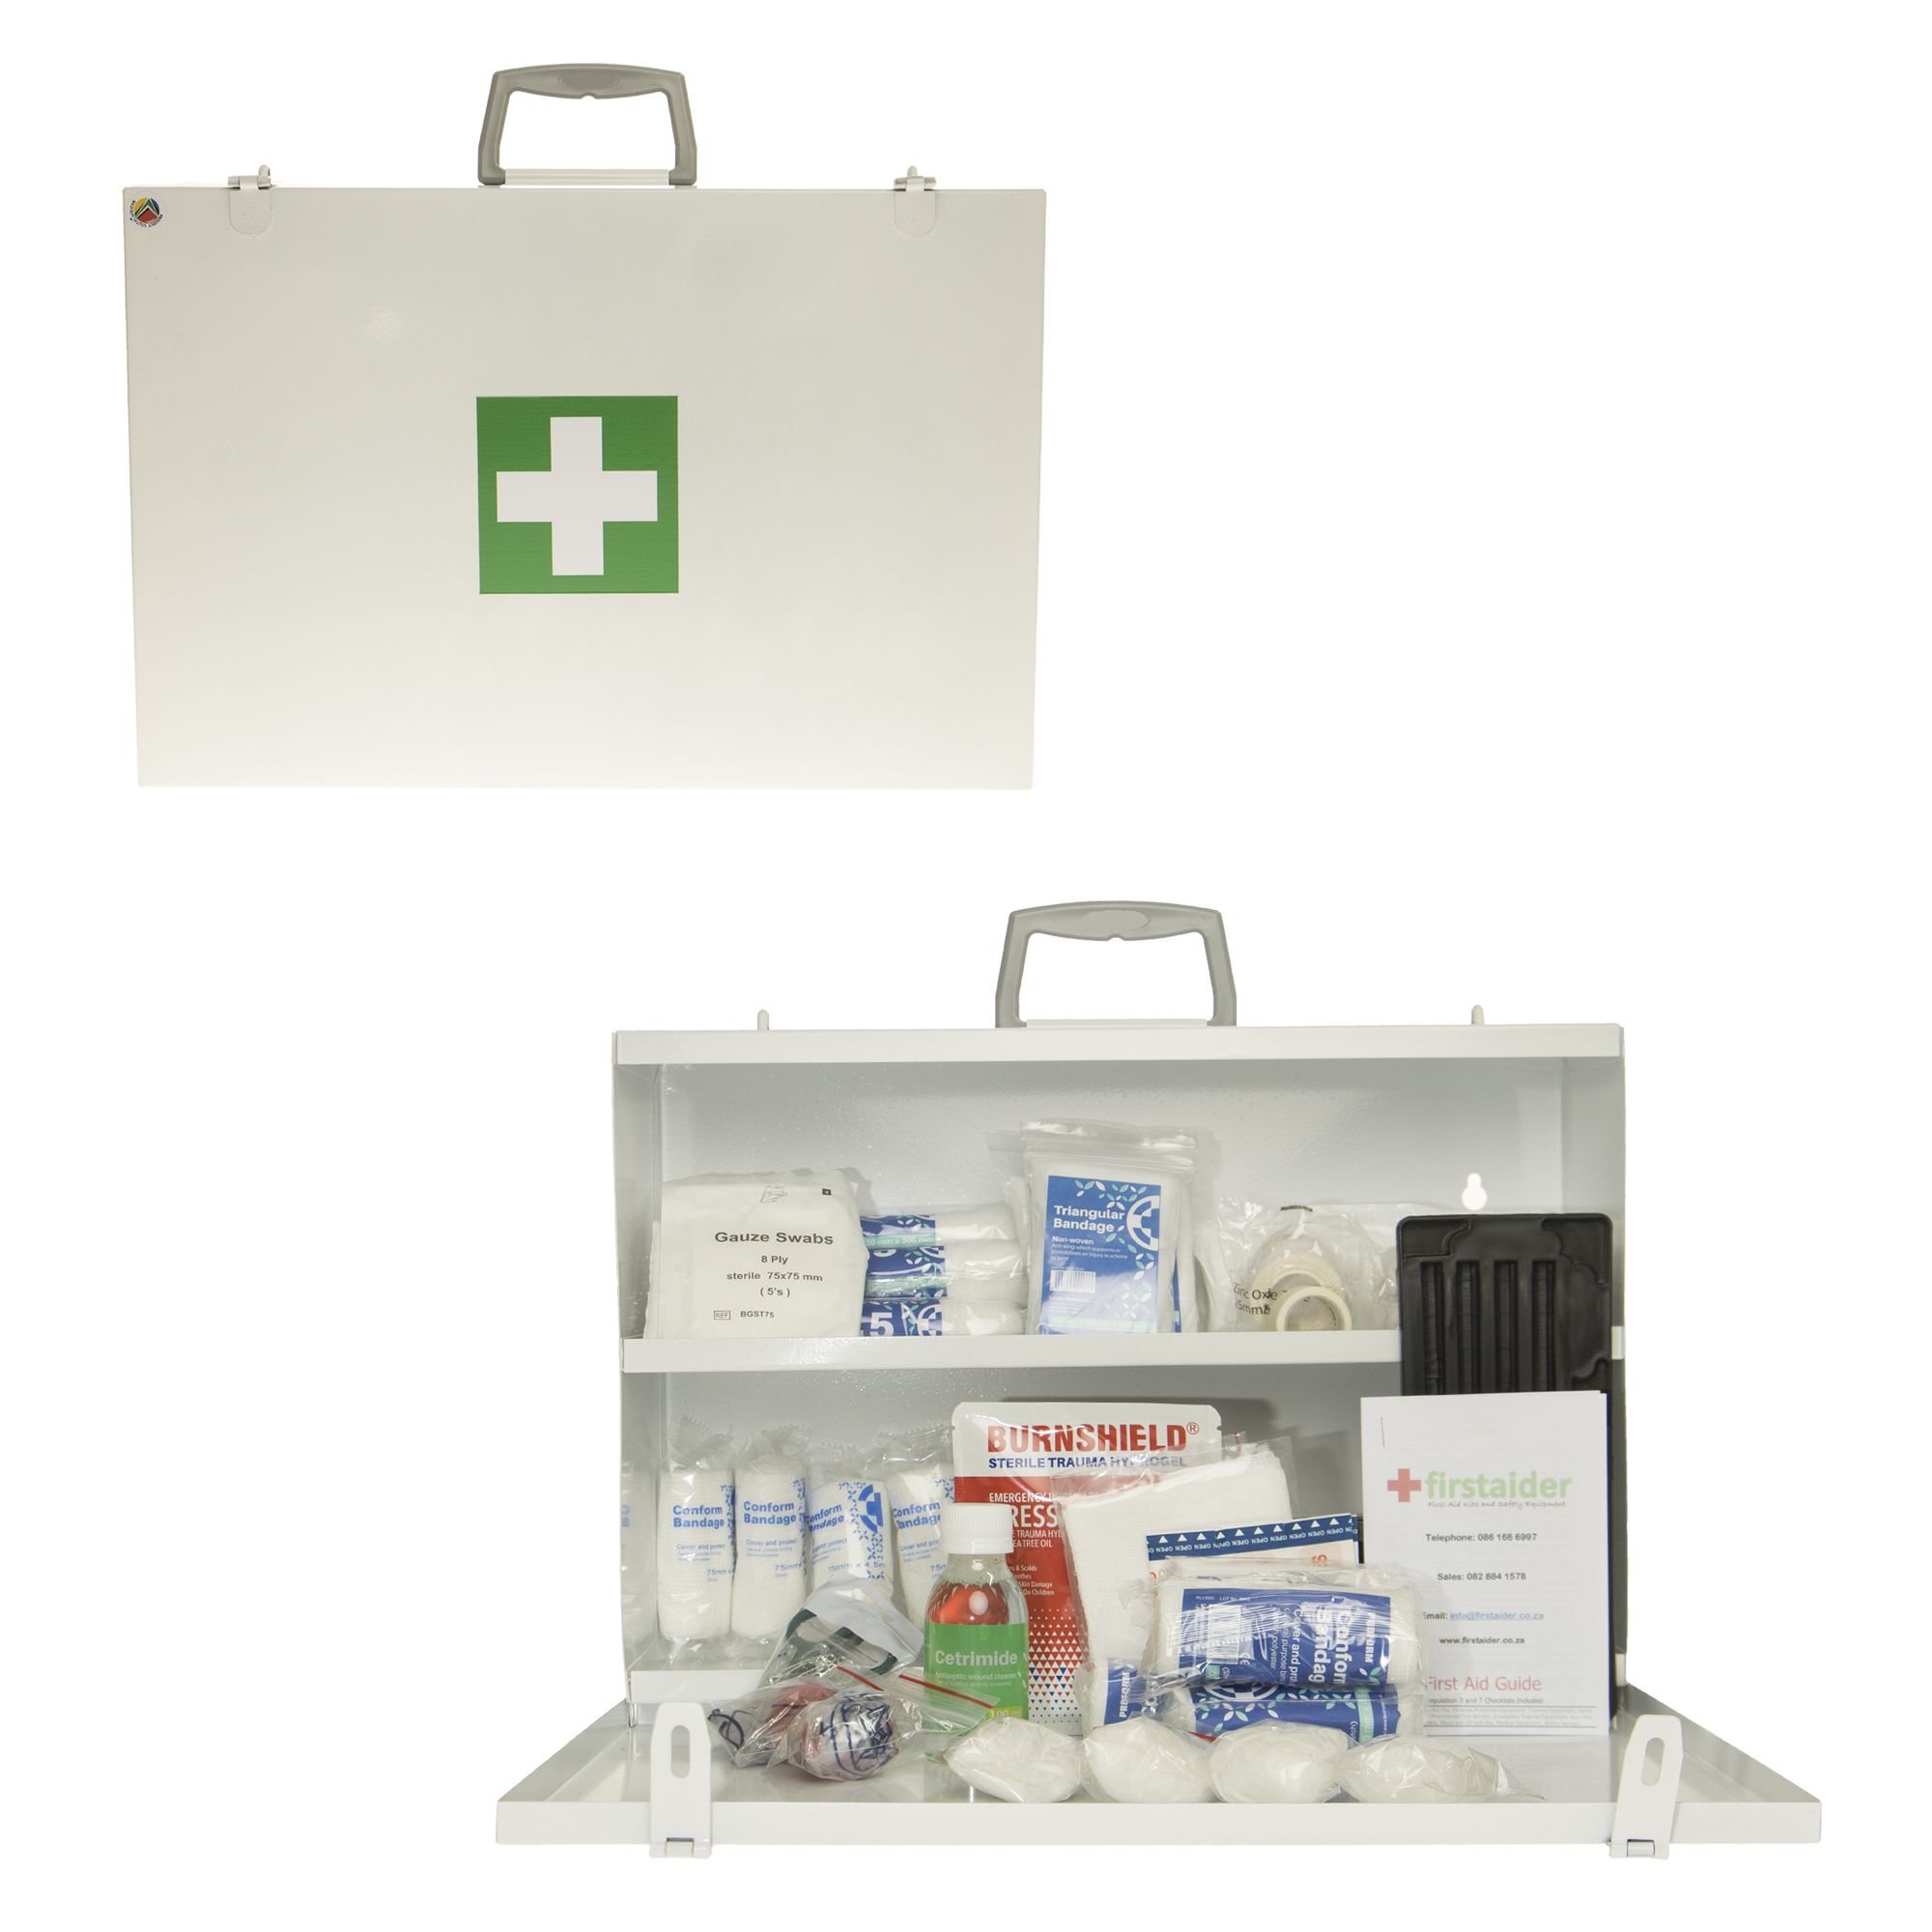 Regulation 3 First Aid Kit in White Metal Box Large by Firstaider